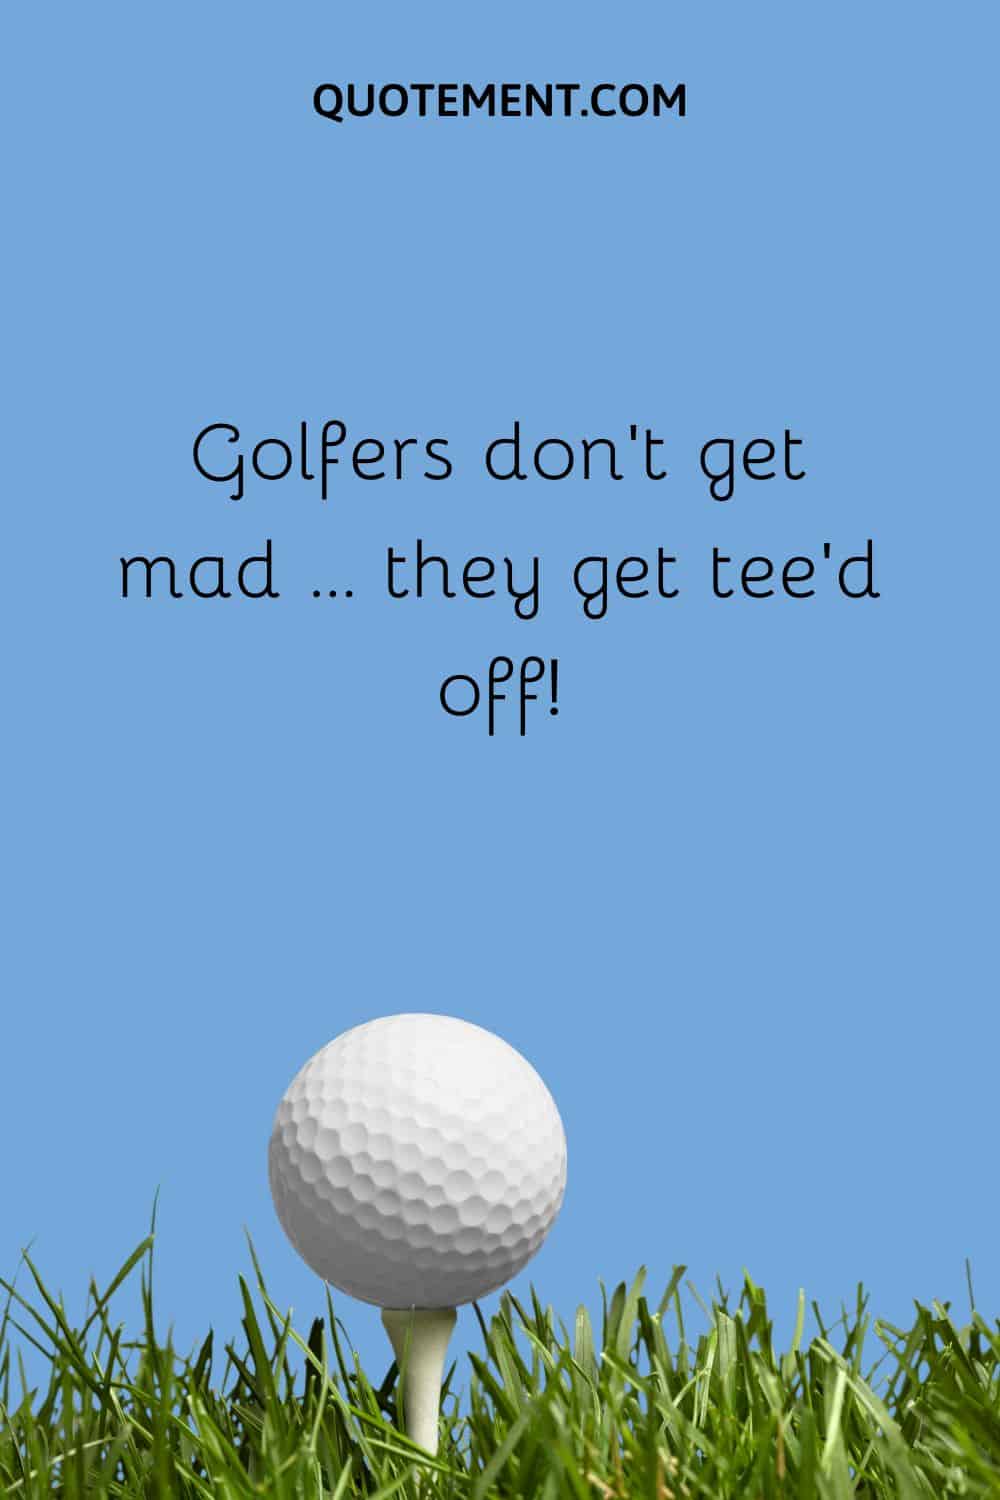 Golfers don’t get mad